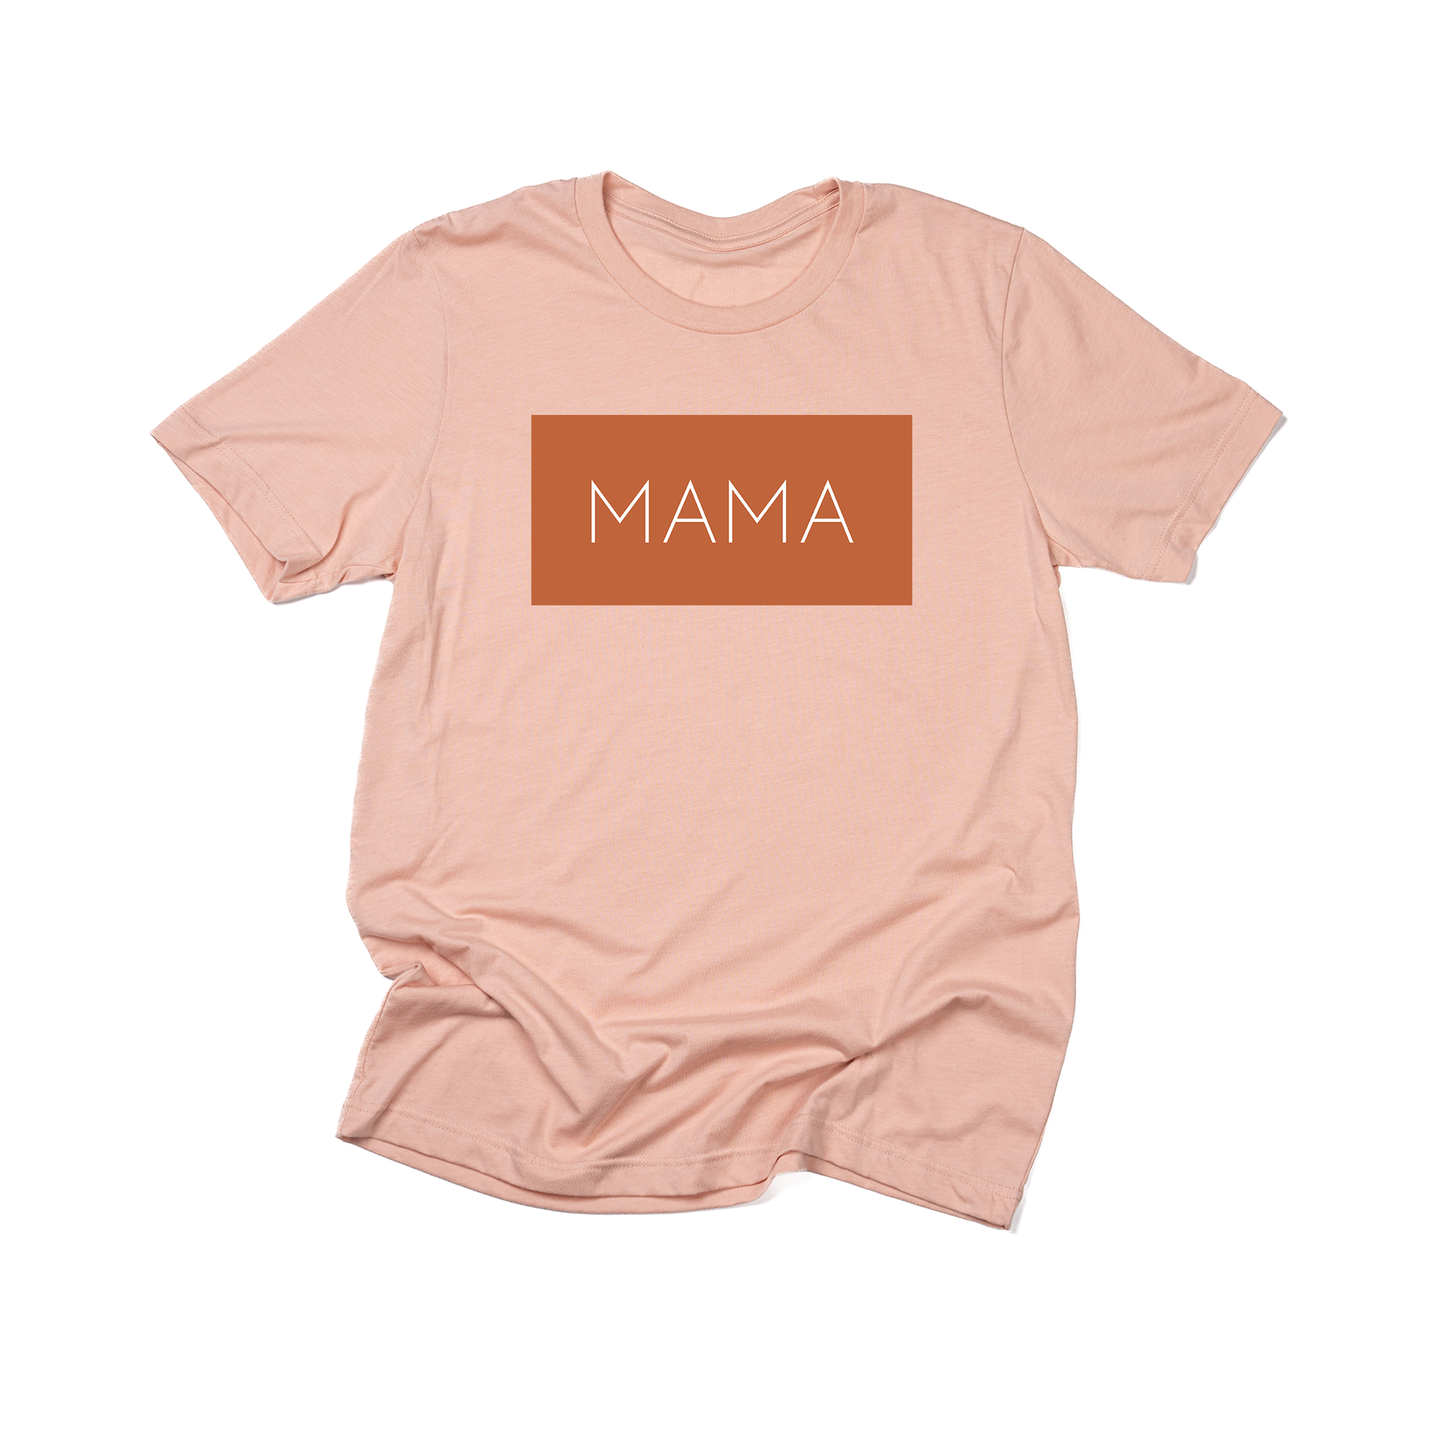 Mama (Boxed Collection, Rust Box/White Text, Across Front) - Tee (Peach)